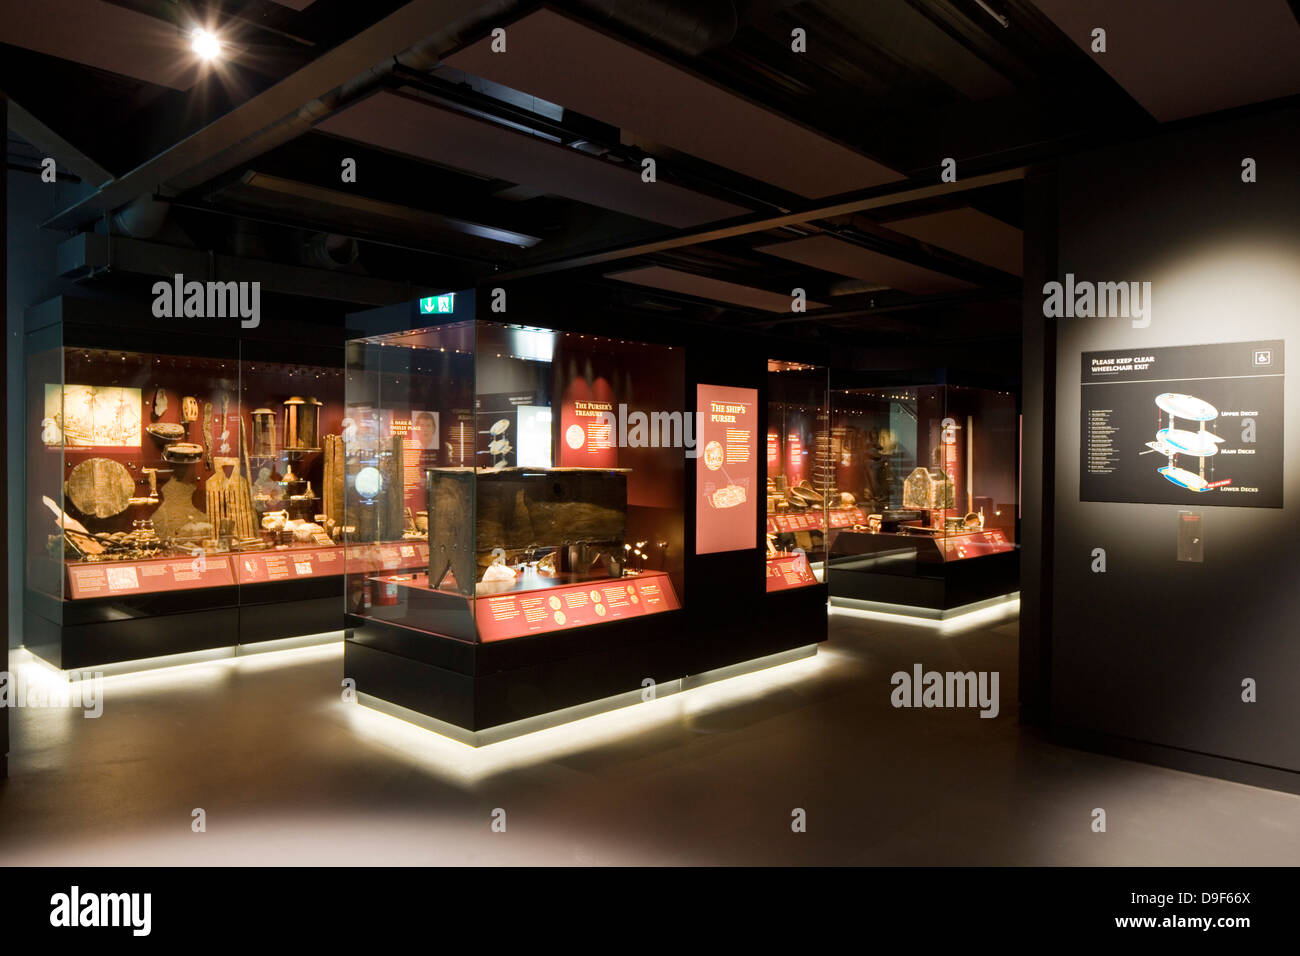 How to Design Museum Interiors: Display Cases to Protect